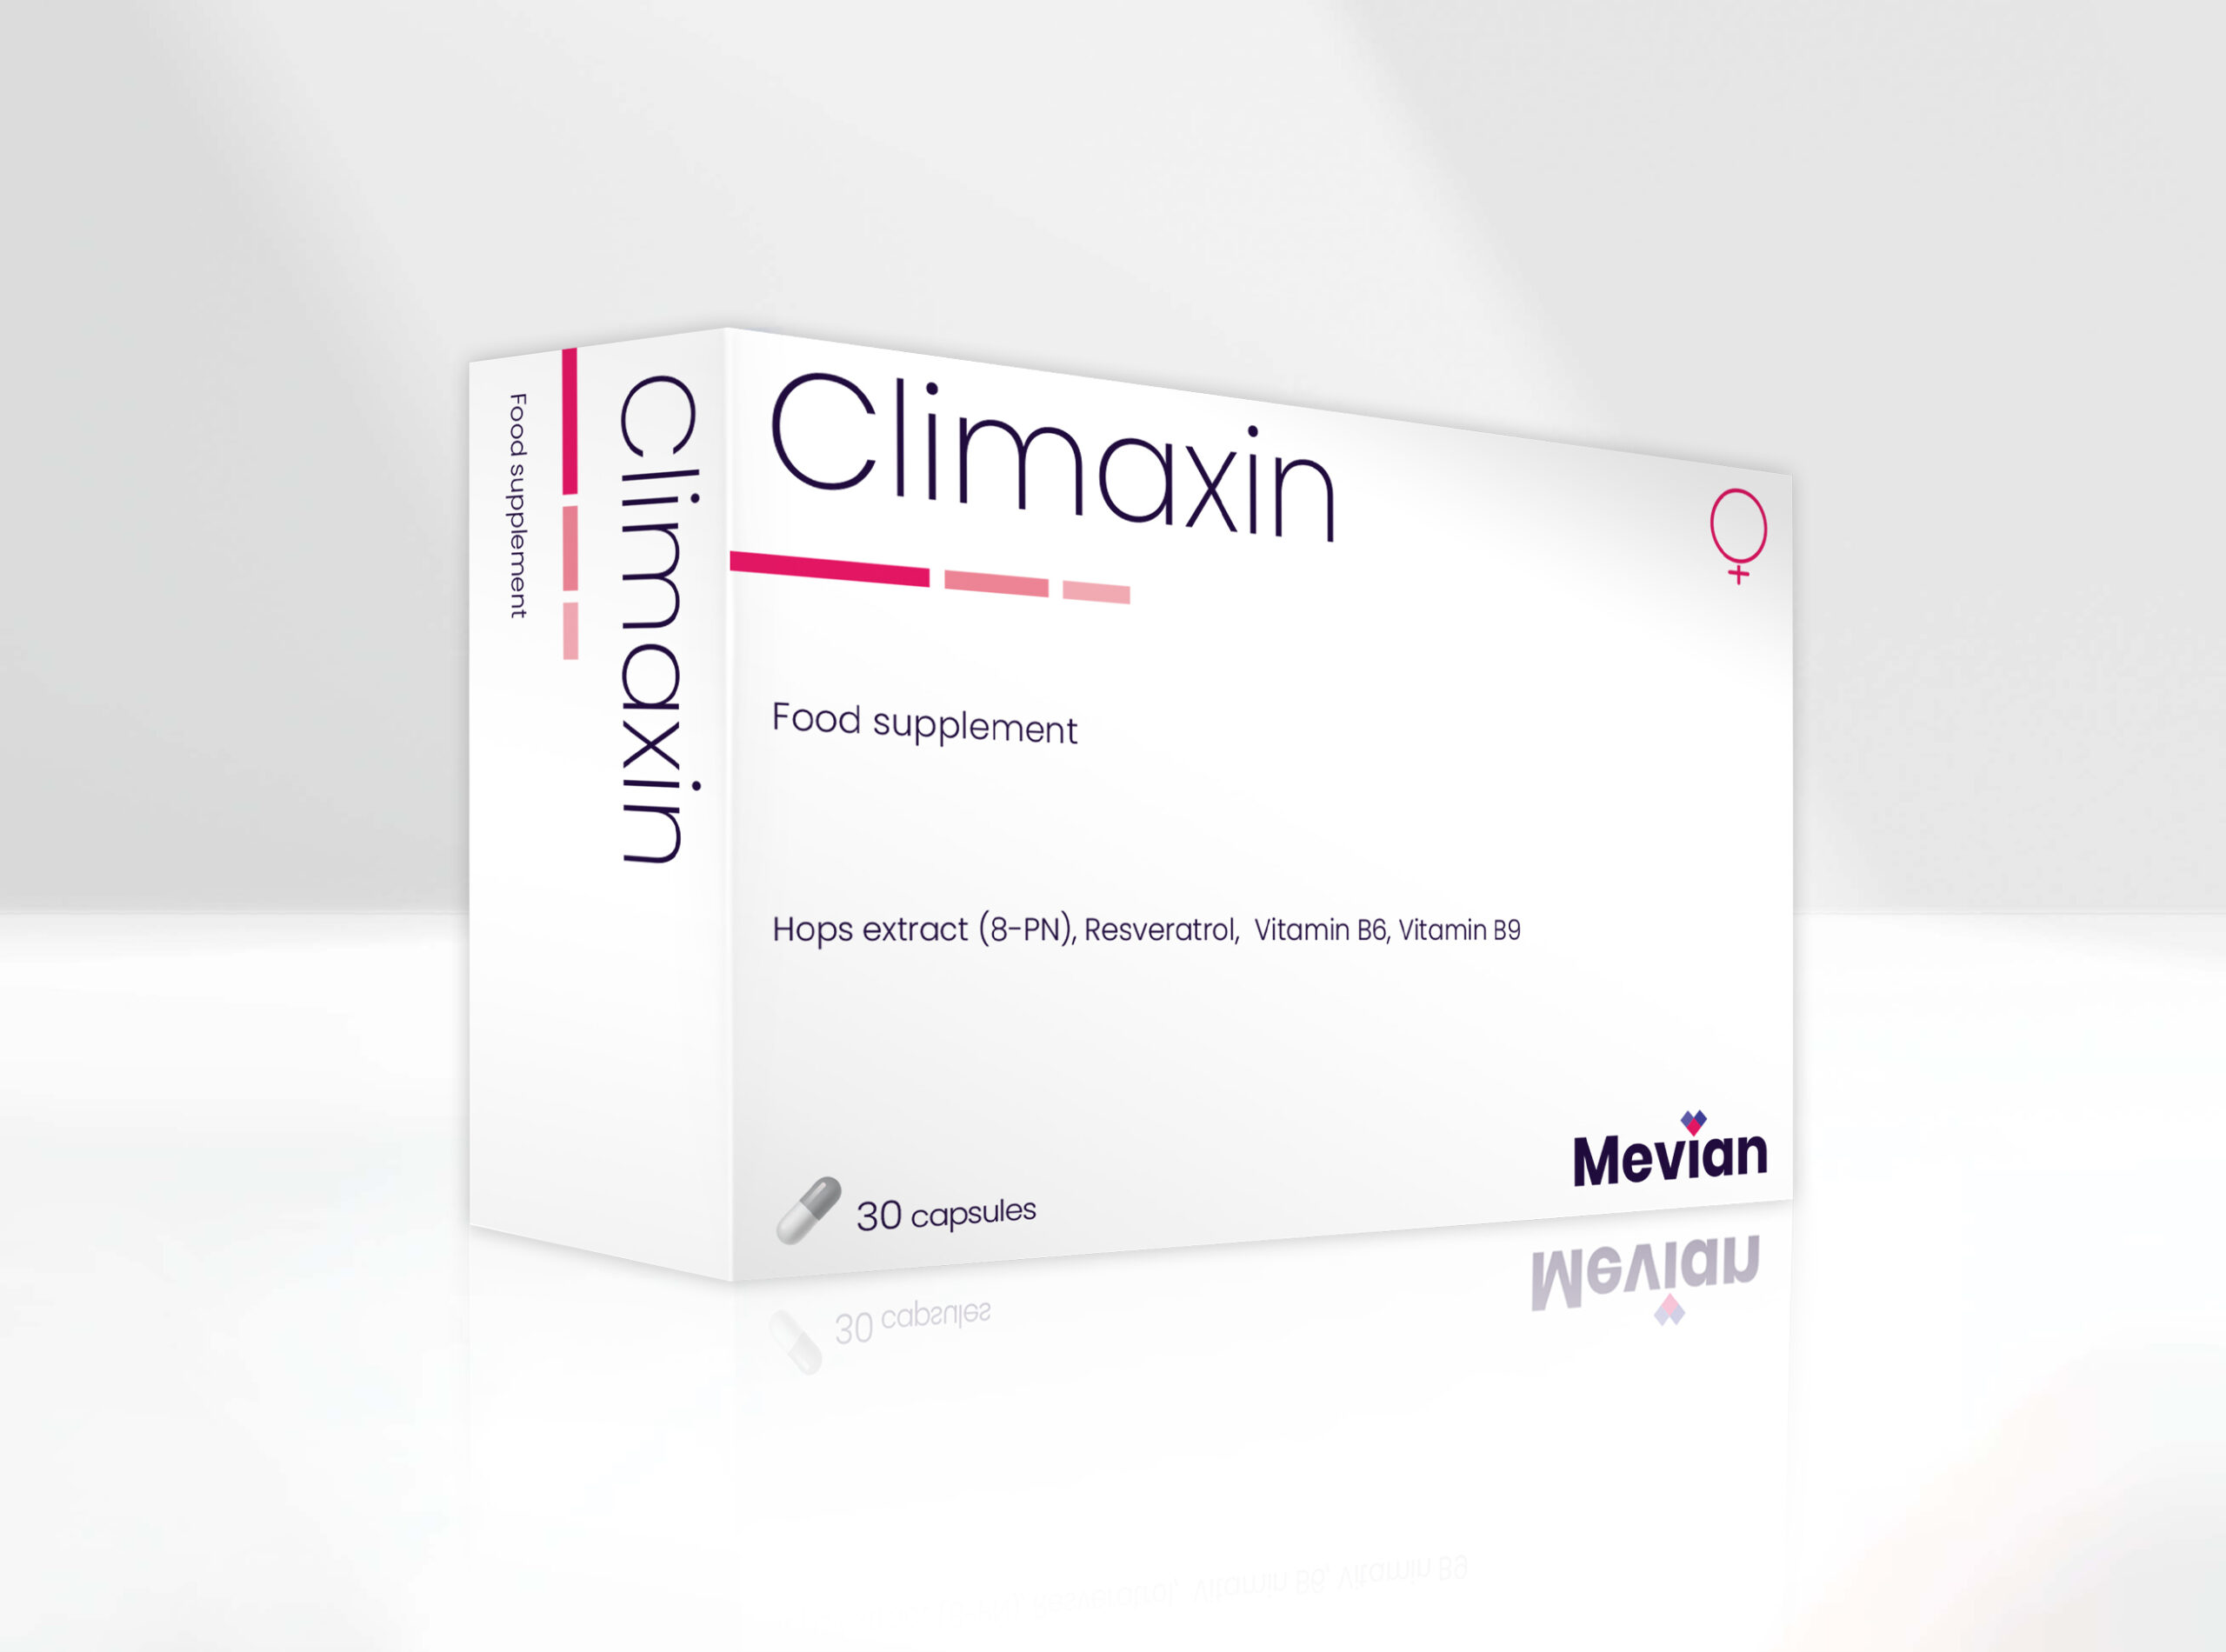 Climaxin is an effective supplement targeting serotonin levels and inflammation to support perimenopausal women dealing with climacteric symptoms.